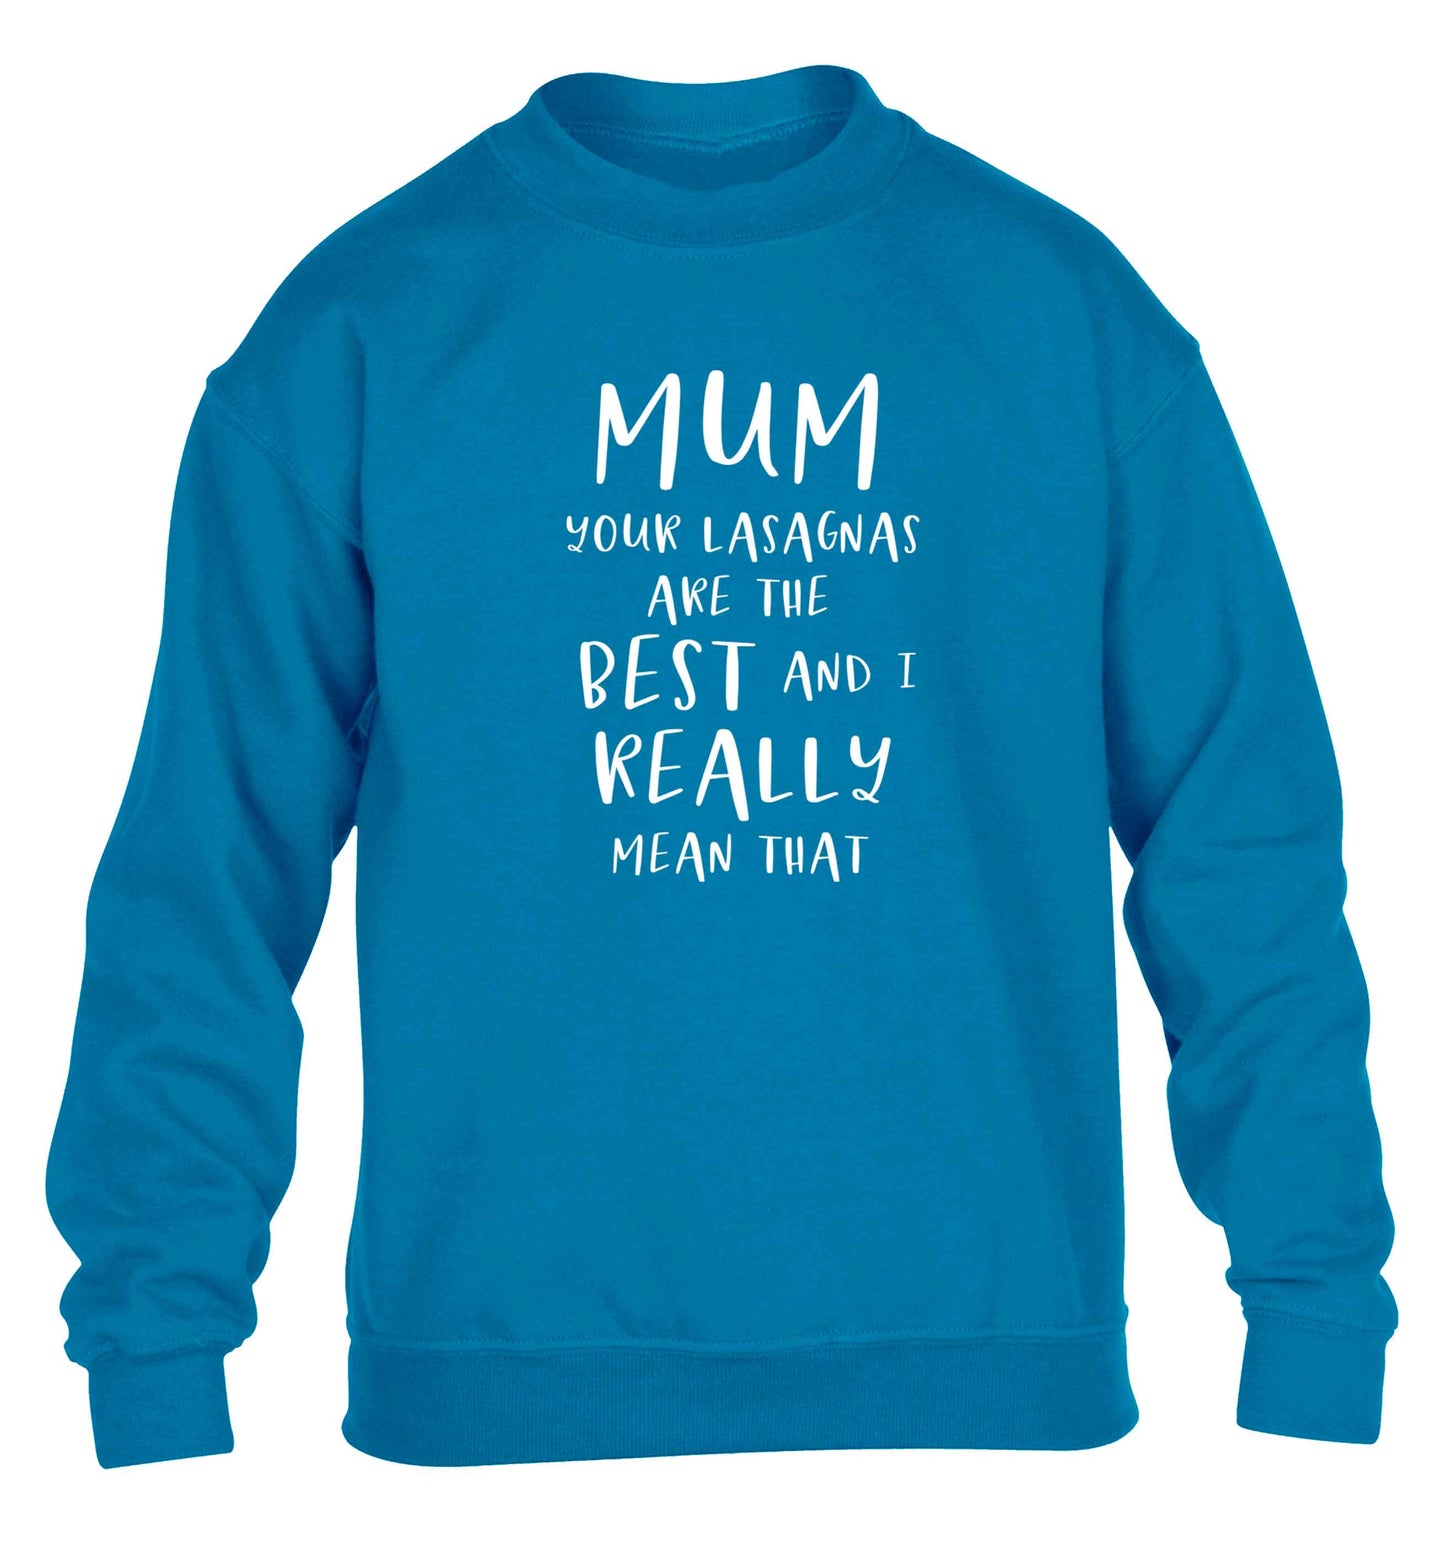 Funny gifts for your mum on mother's dayor her birthday! Mum your lasagnas are the best and I really mean that children's blue sweater 12-13 Years